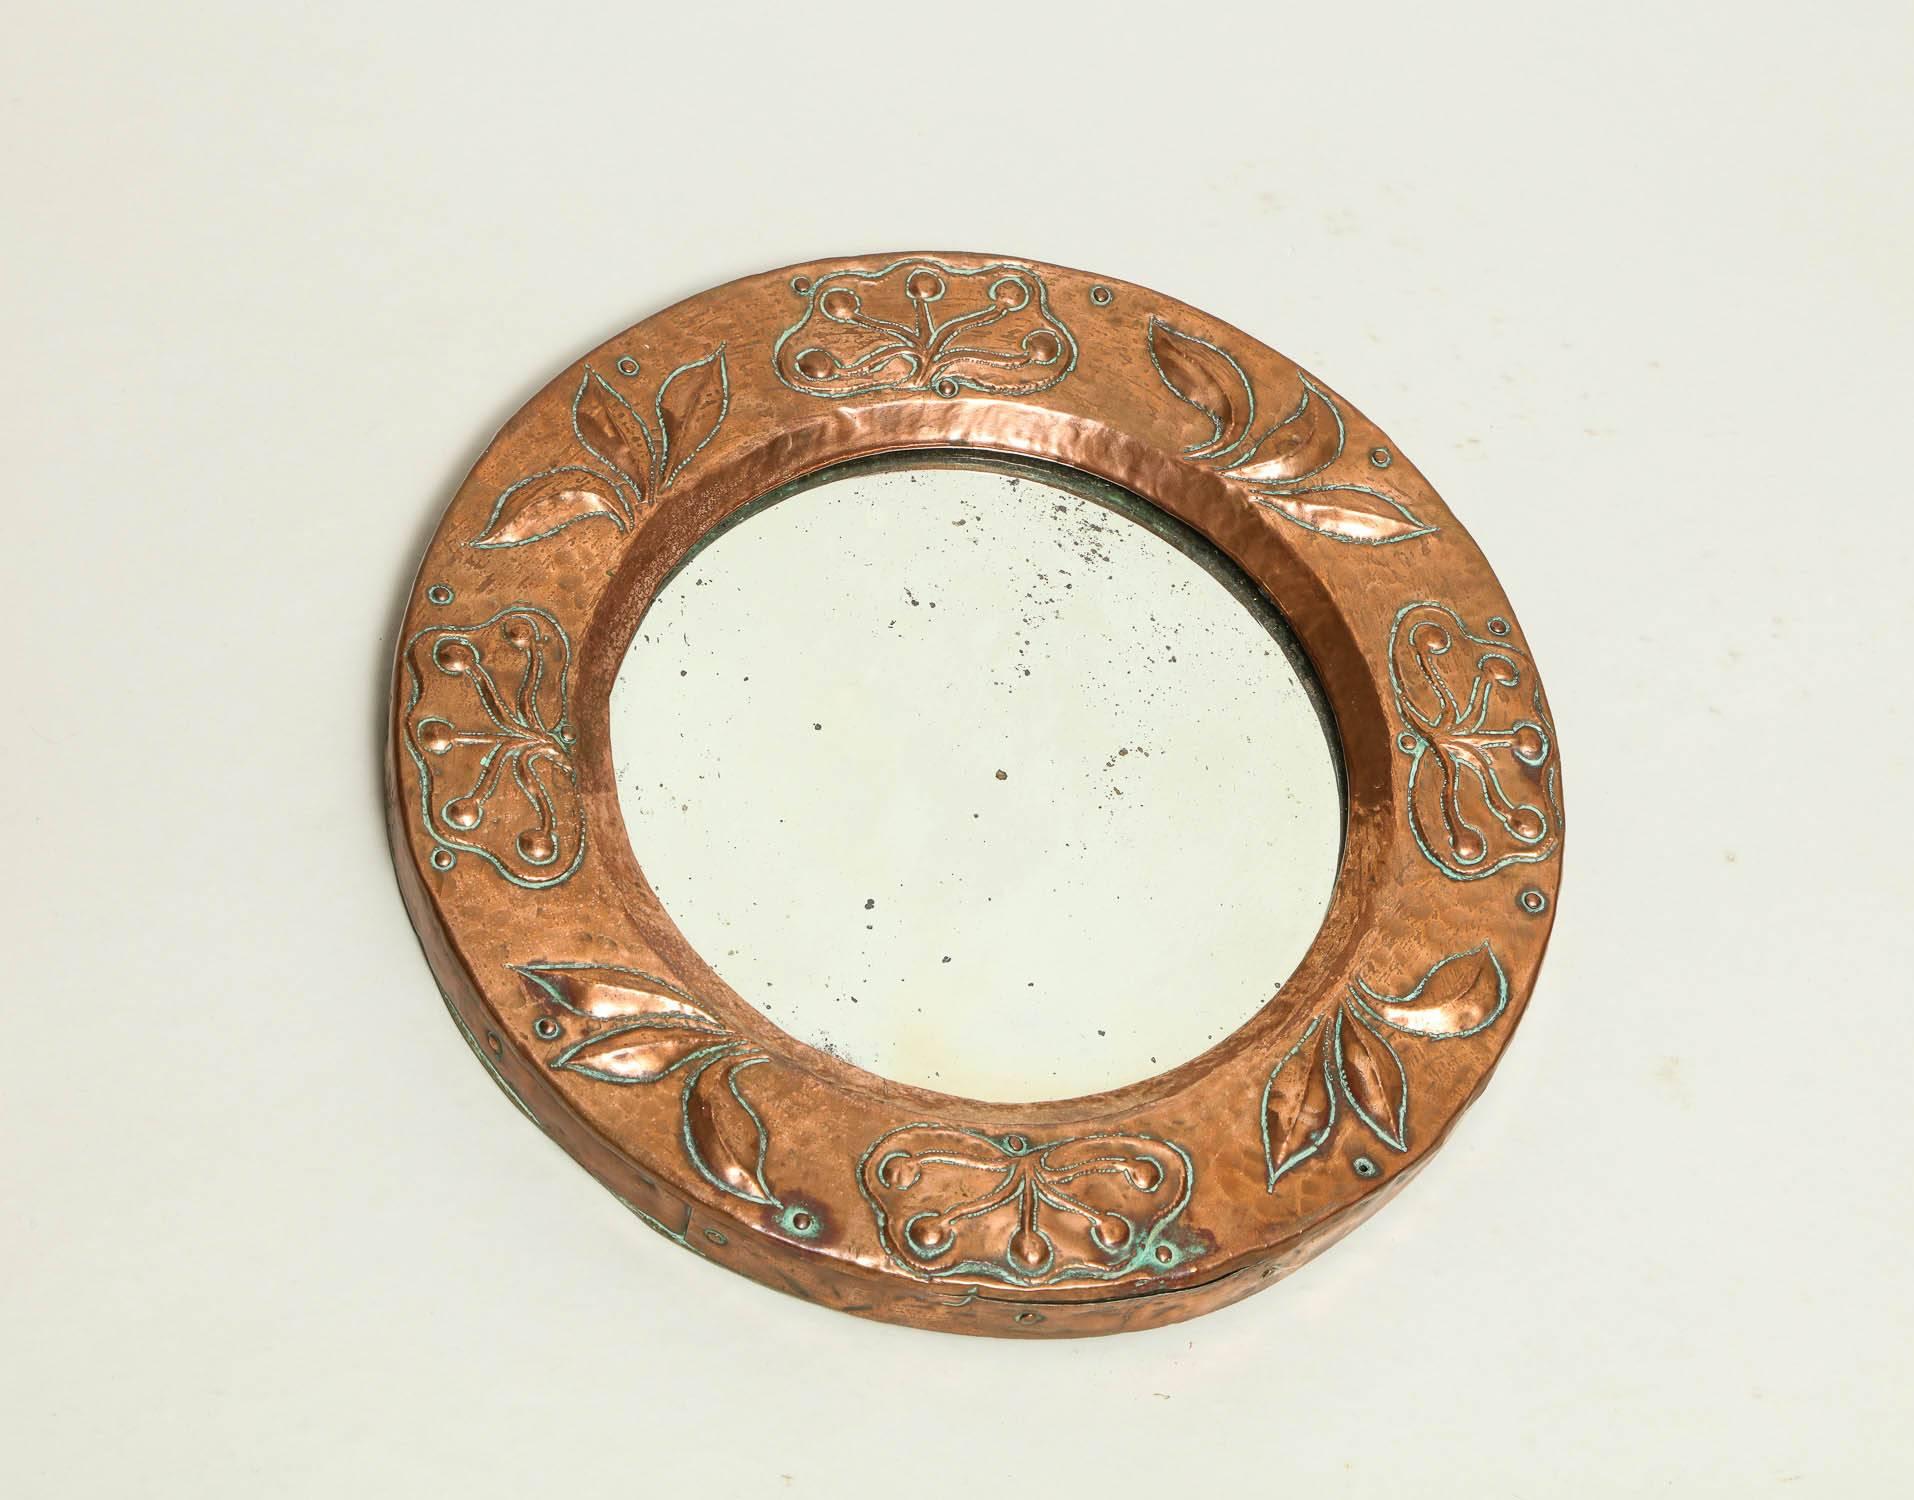 A diminutive English Arts & Crafts round mirror with copper frame having repousee leaf designs and a bevelled glass centre English, late 19th century.
  